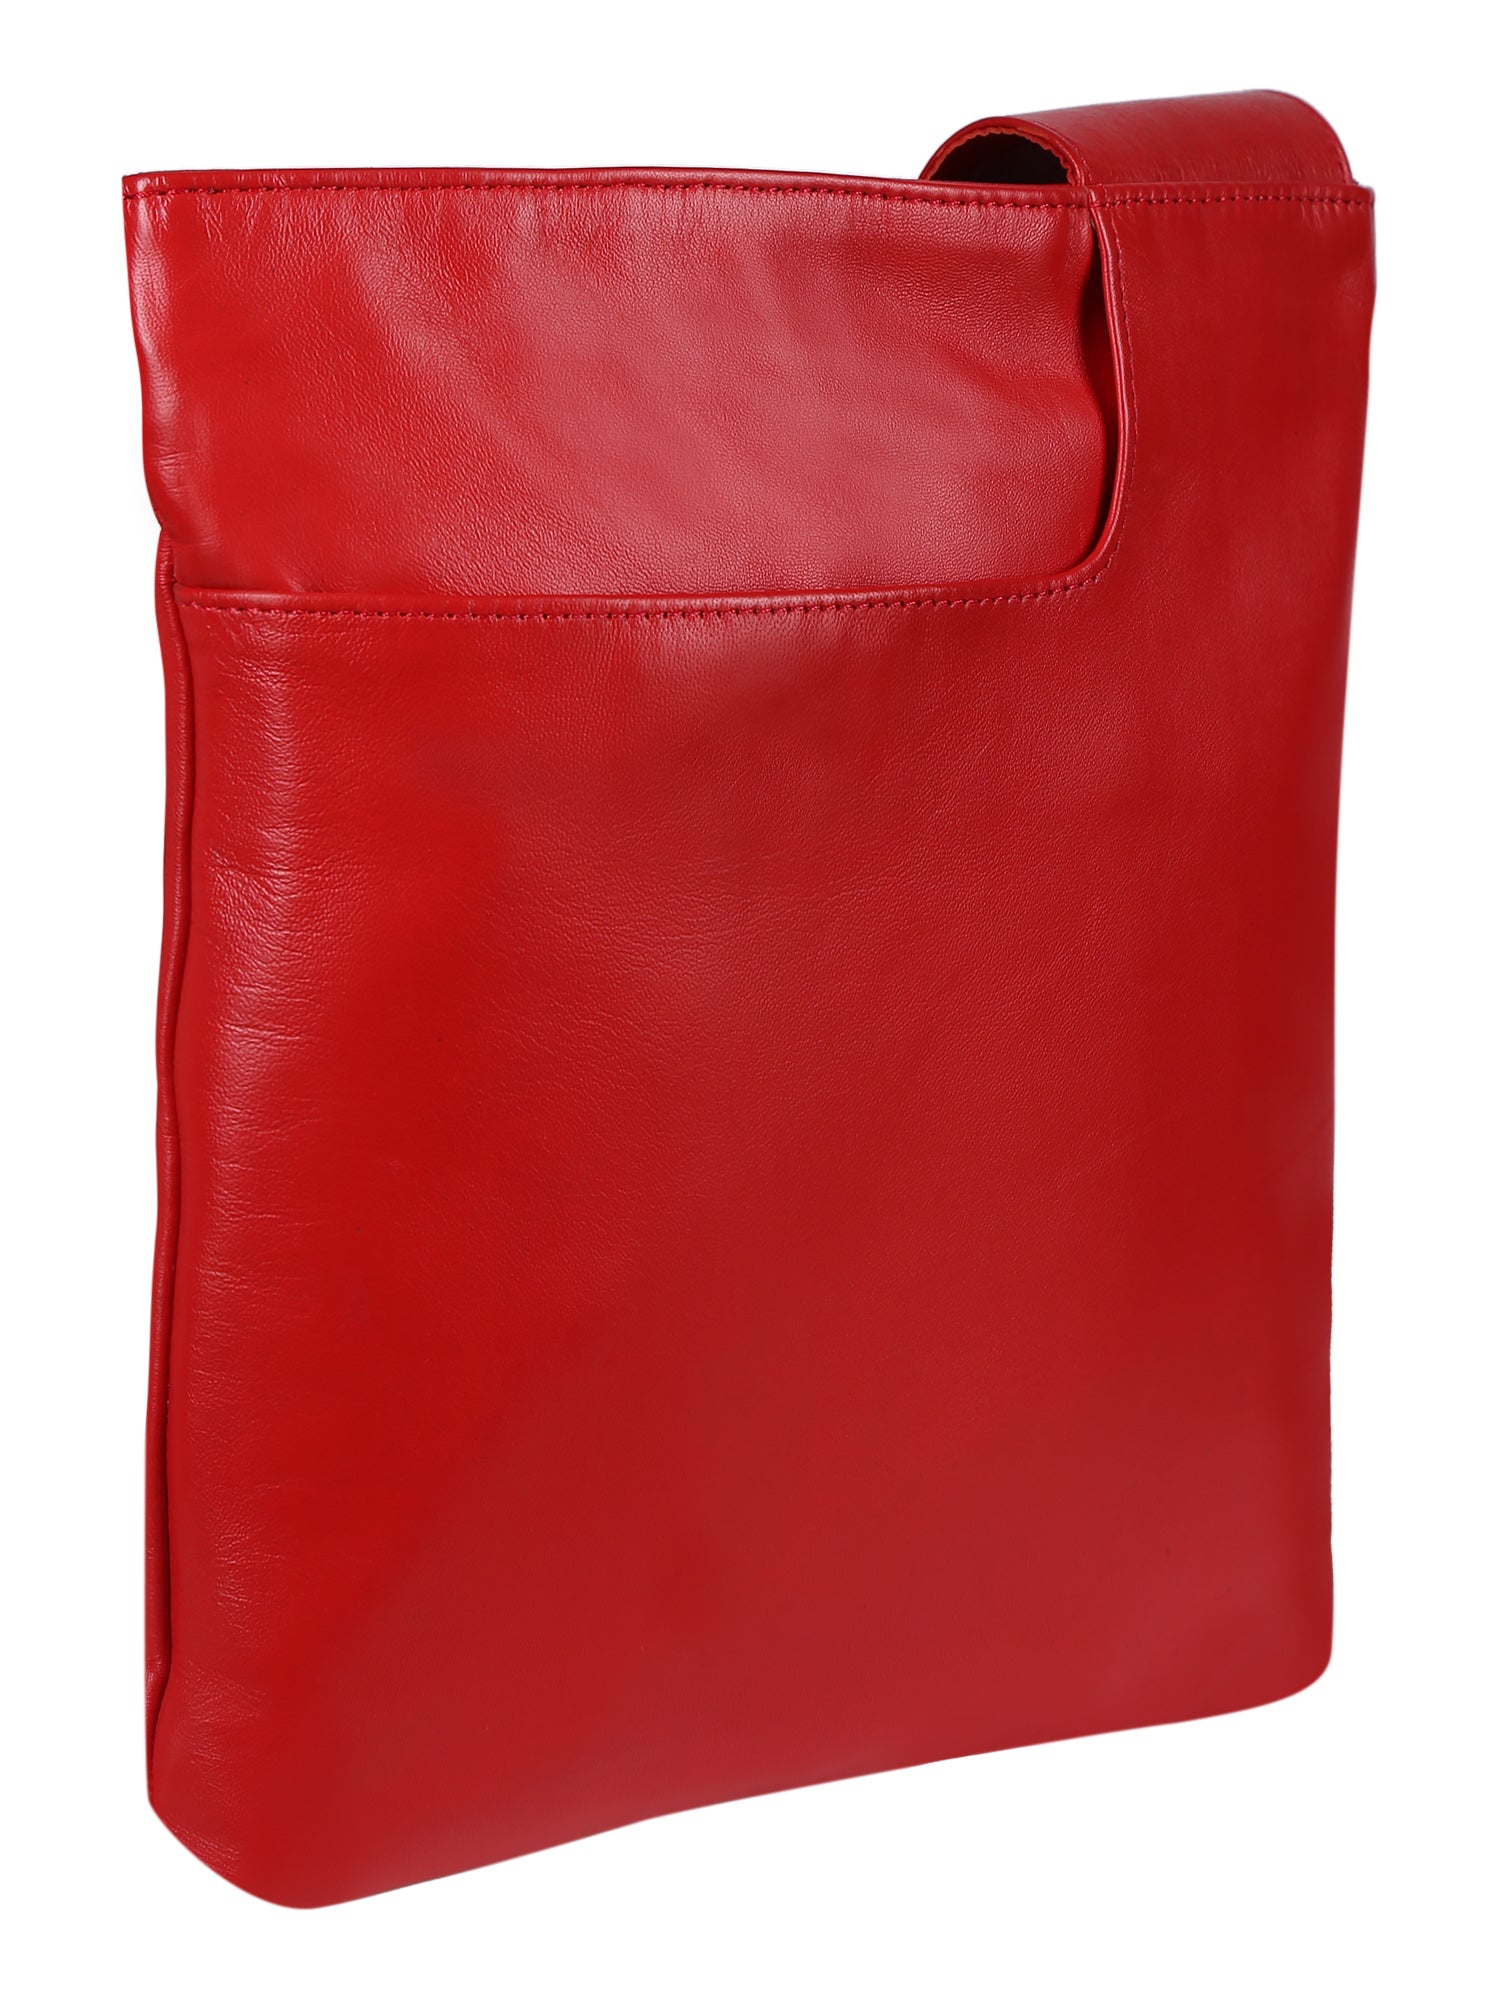 Side image of Red FLAT CROSS BODY HAND BAG